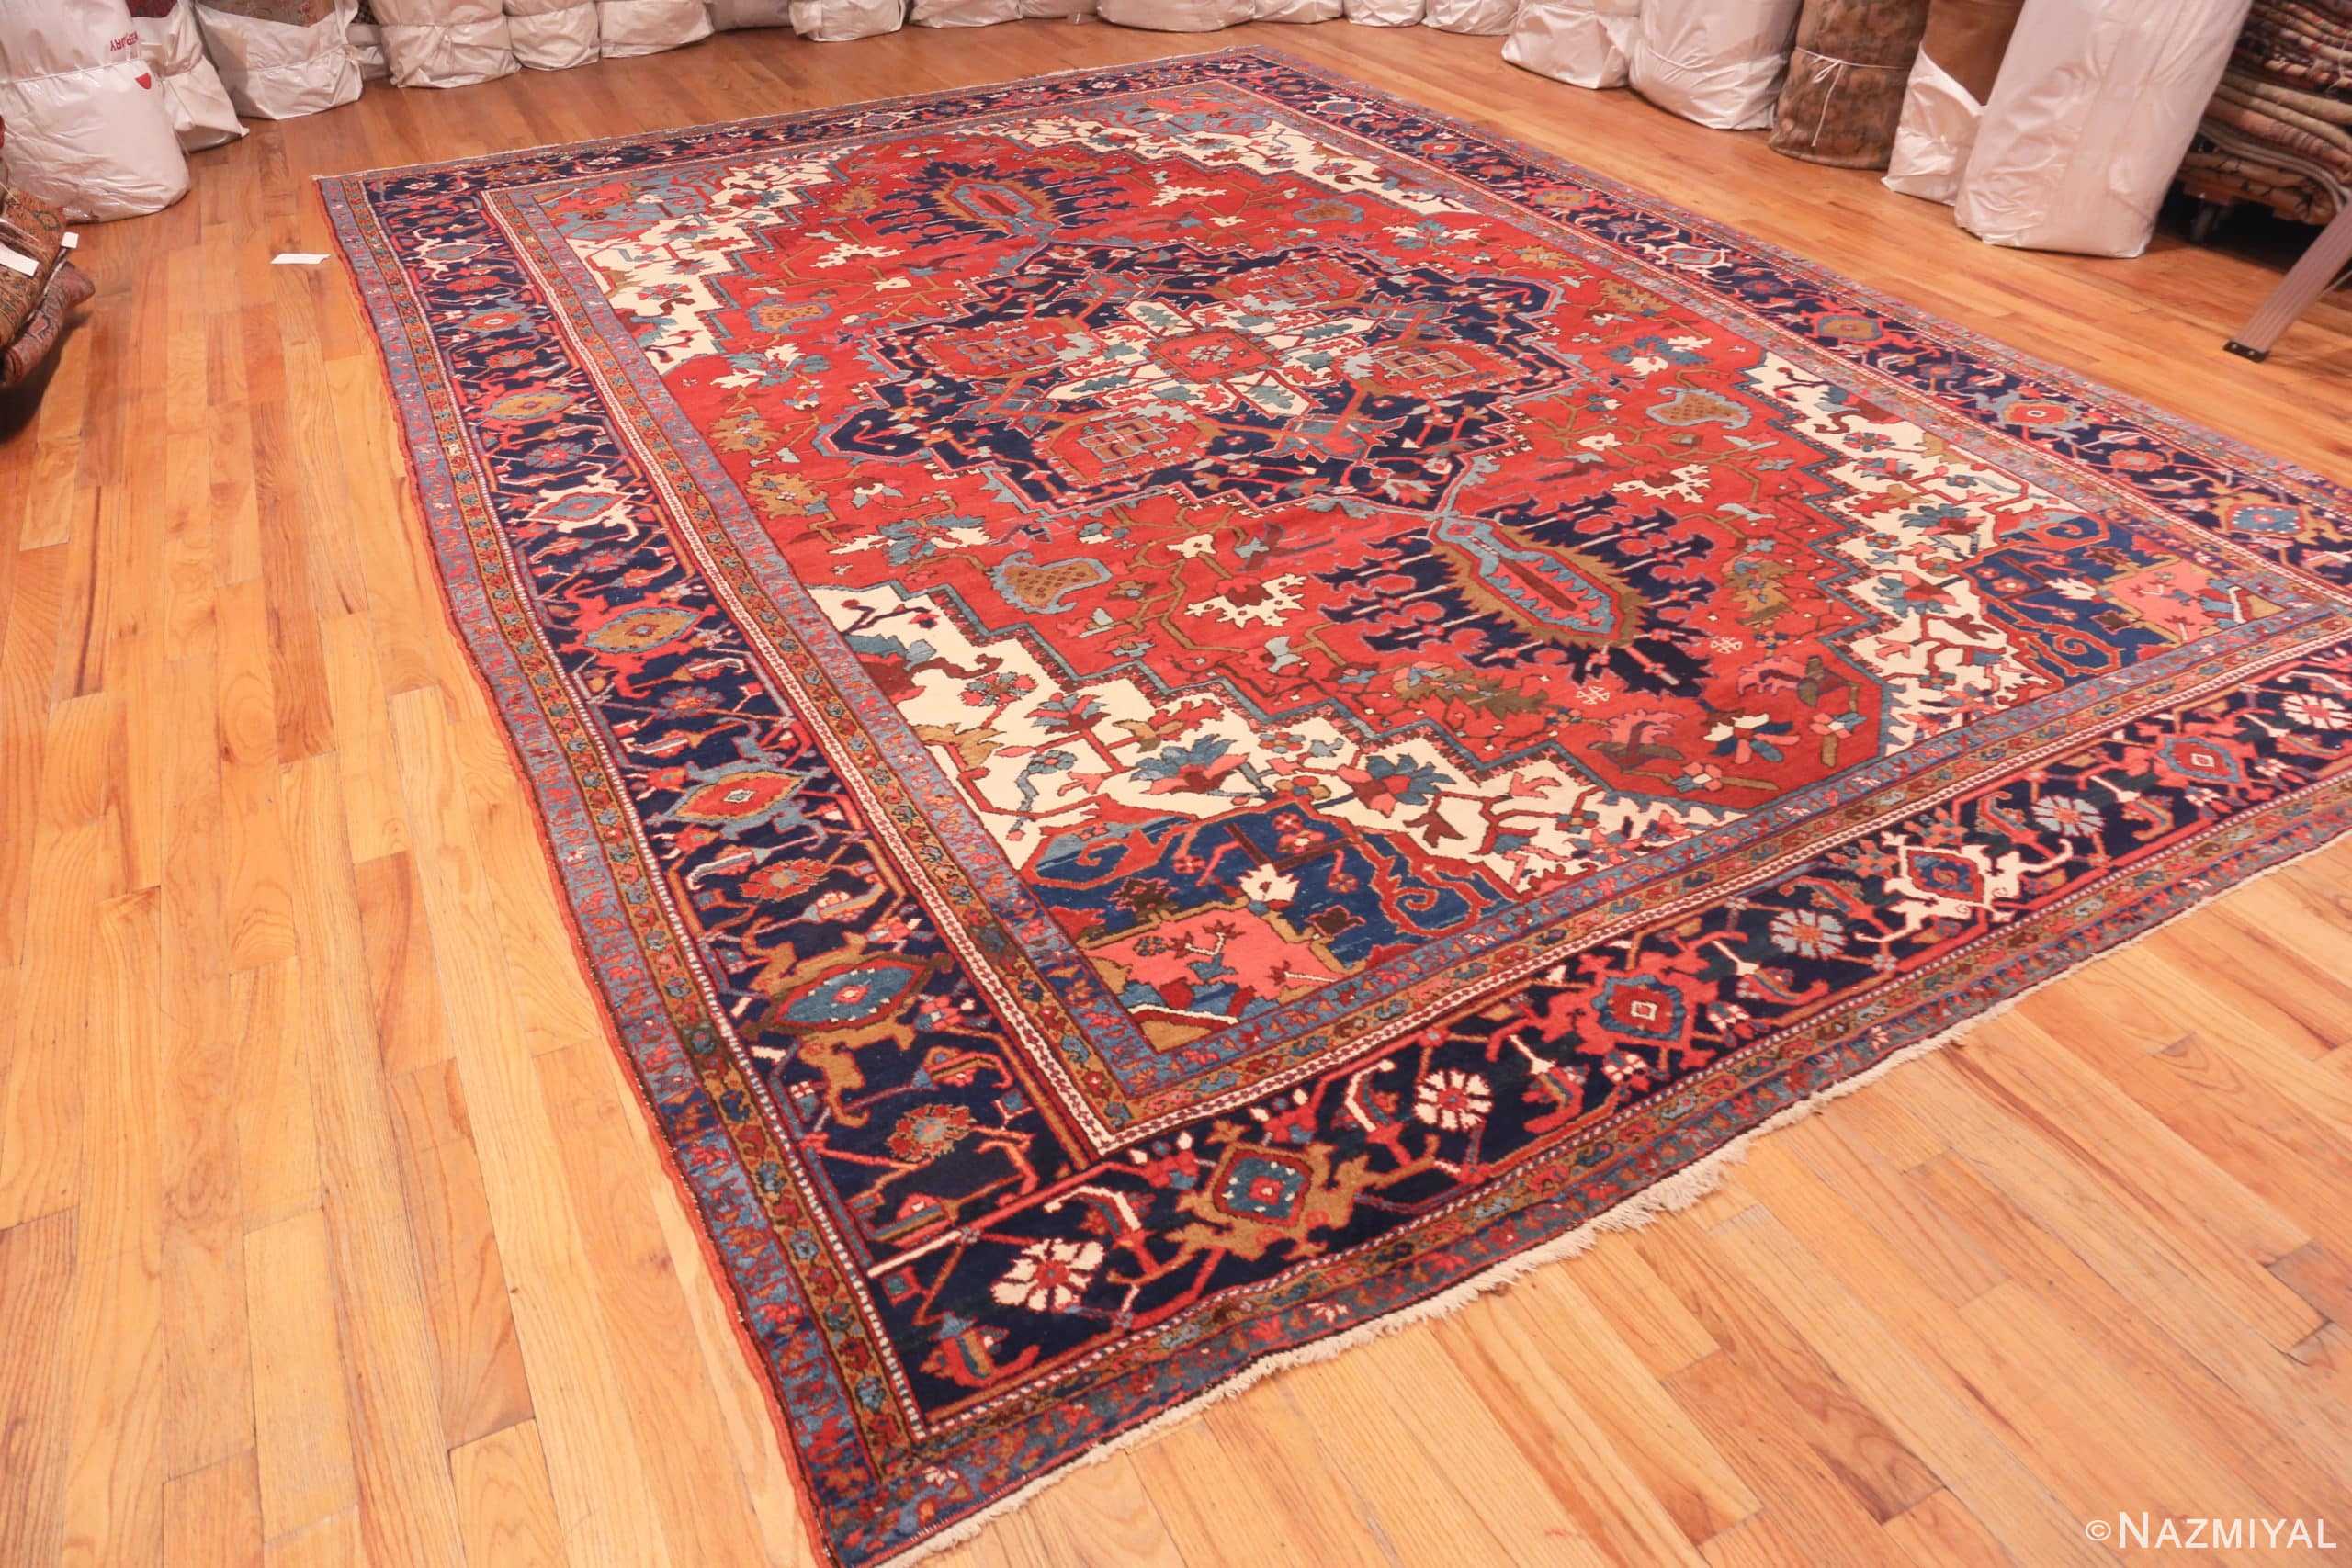 Side Of Vibrant Large Antique Persian Heriz Area Rug 71128 by Nazmiyal Antique Rugs